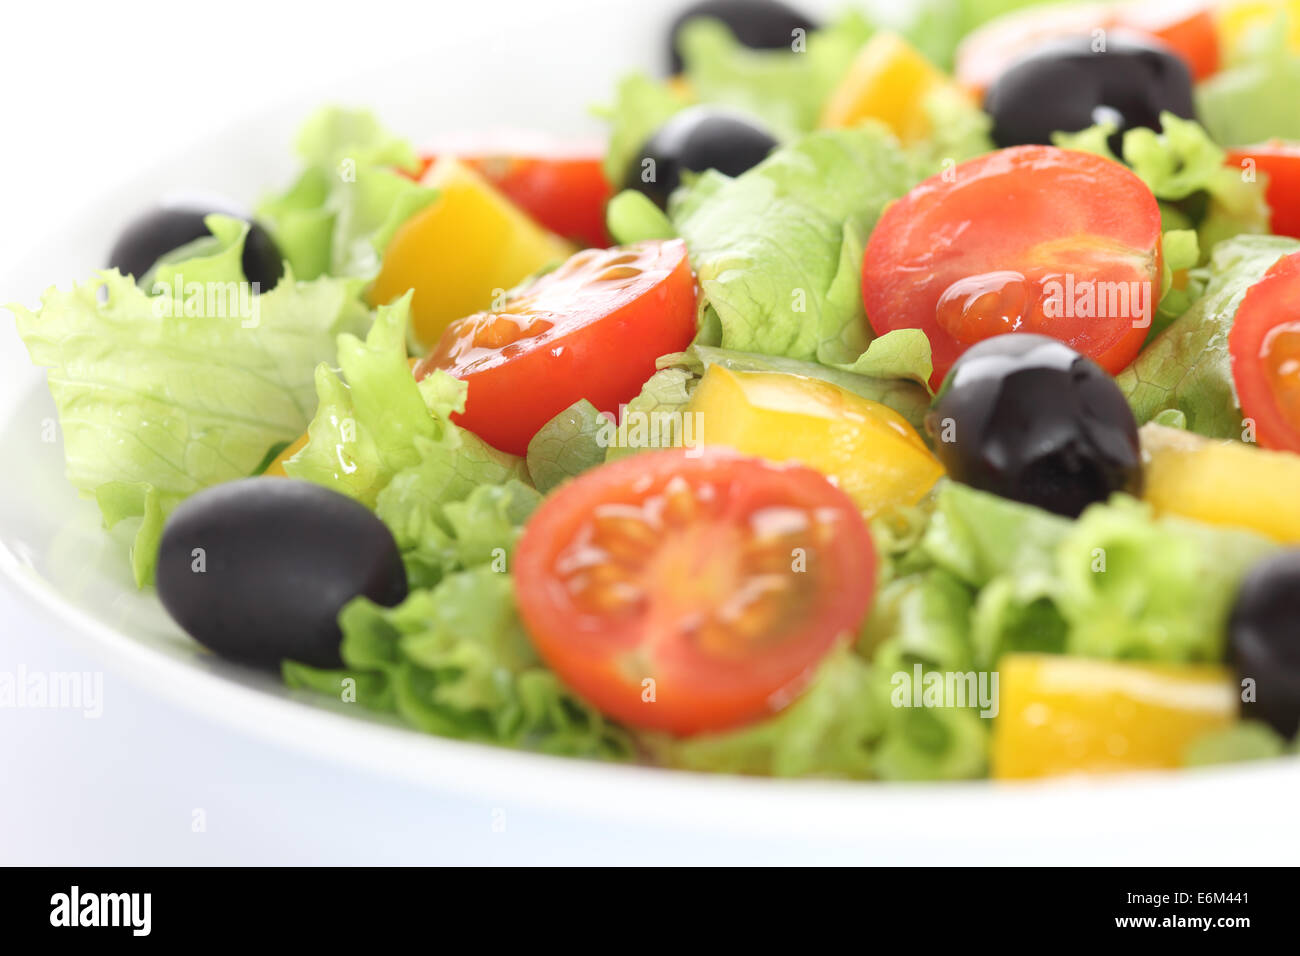 Vegan salad. Ingredients: lettuce, red cherry tomatoes, yellow bell pepper, black olives, olive oil. Stock Photo